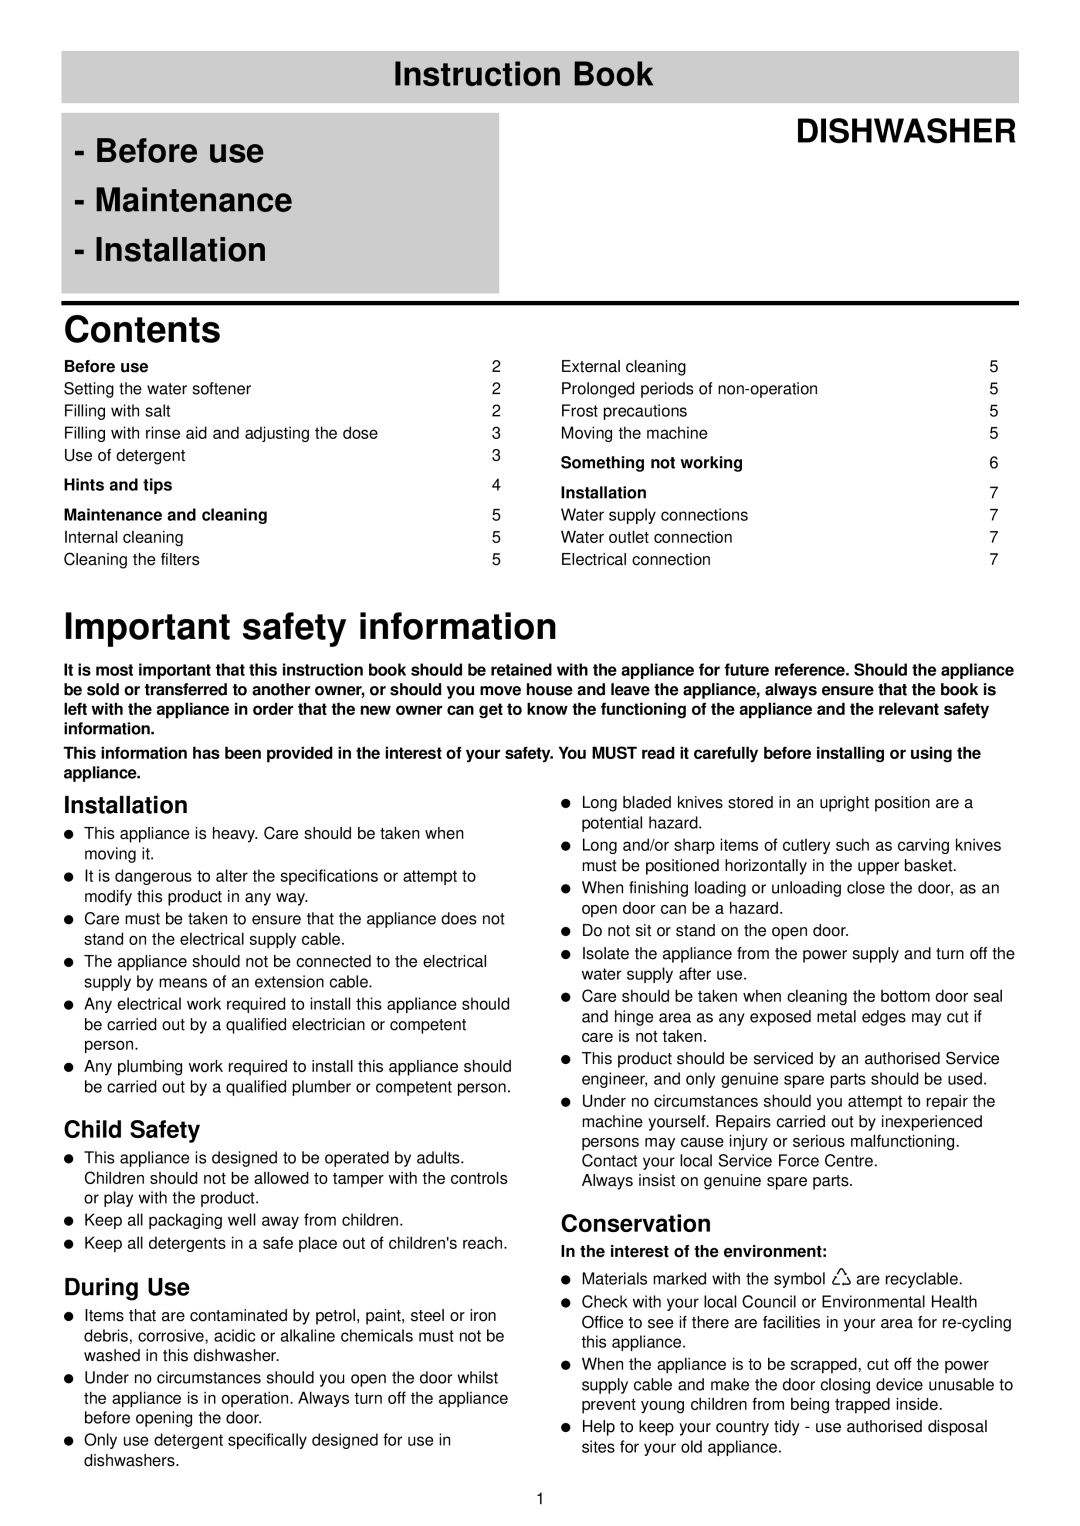 Electrolux ESL 4114 manual Contents, Important safety information, Installation, Child Safety, During Use, Conservation 